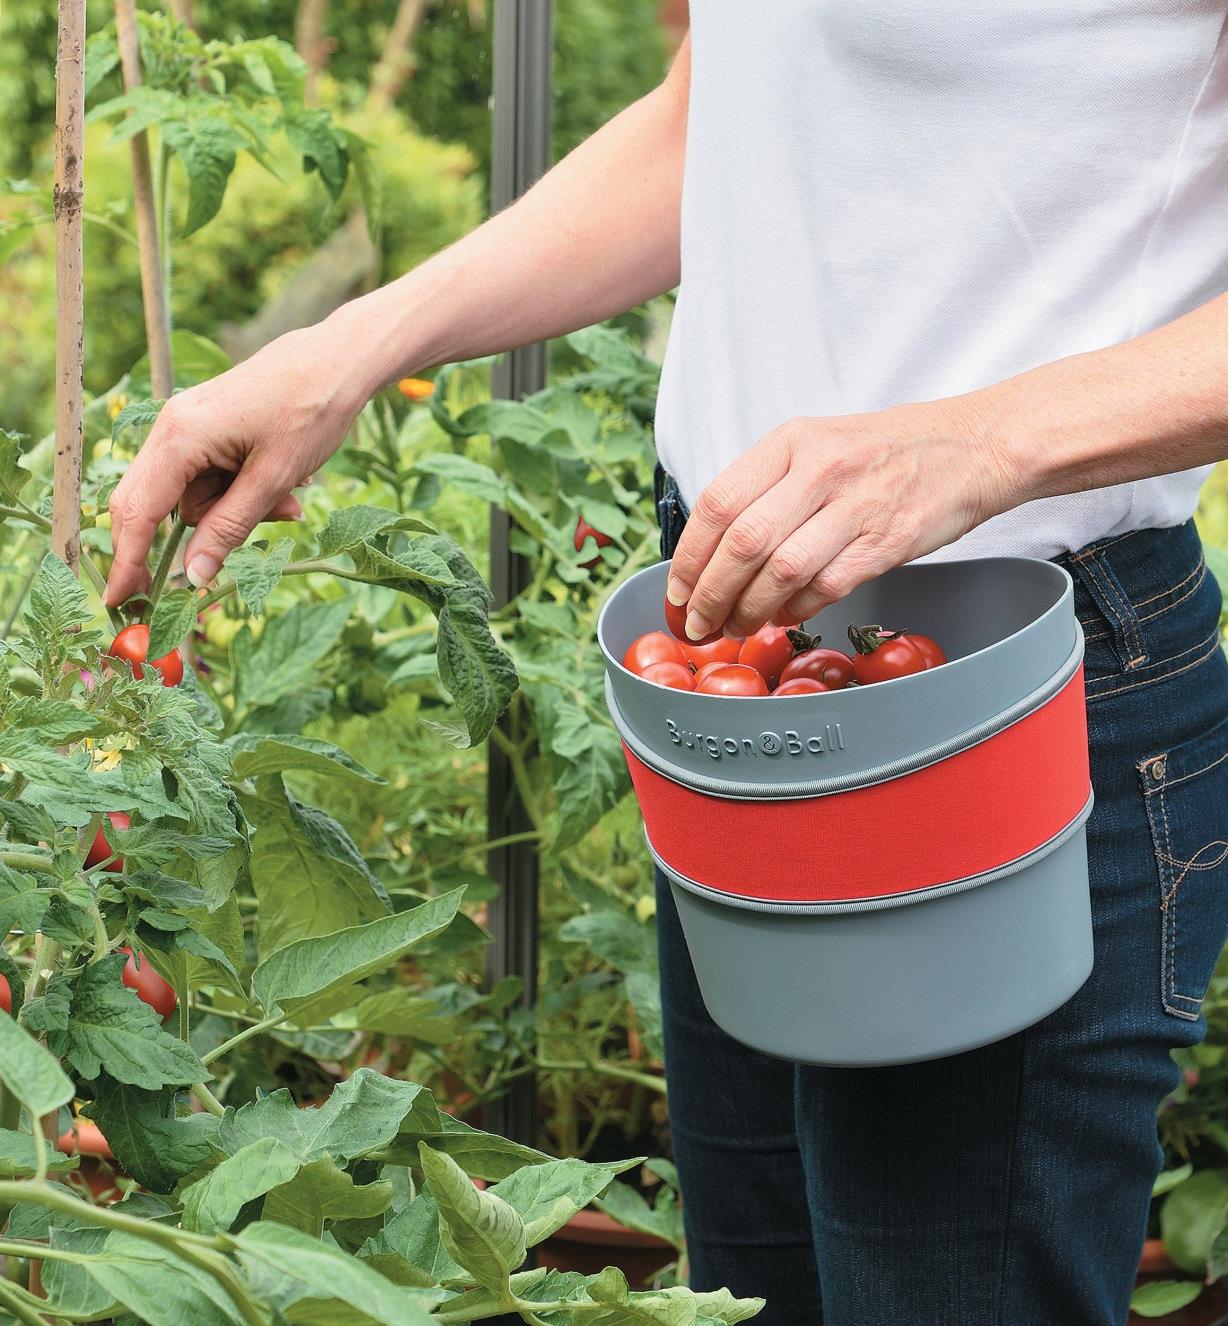 Hip-Trug being used to collect tomatoes from the garden